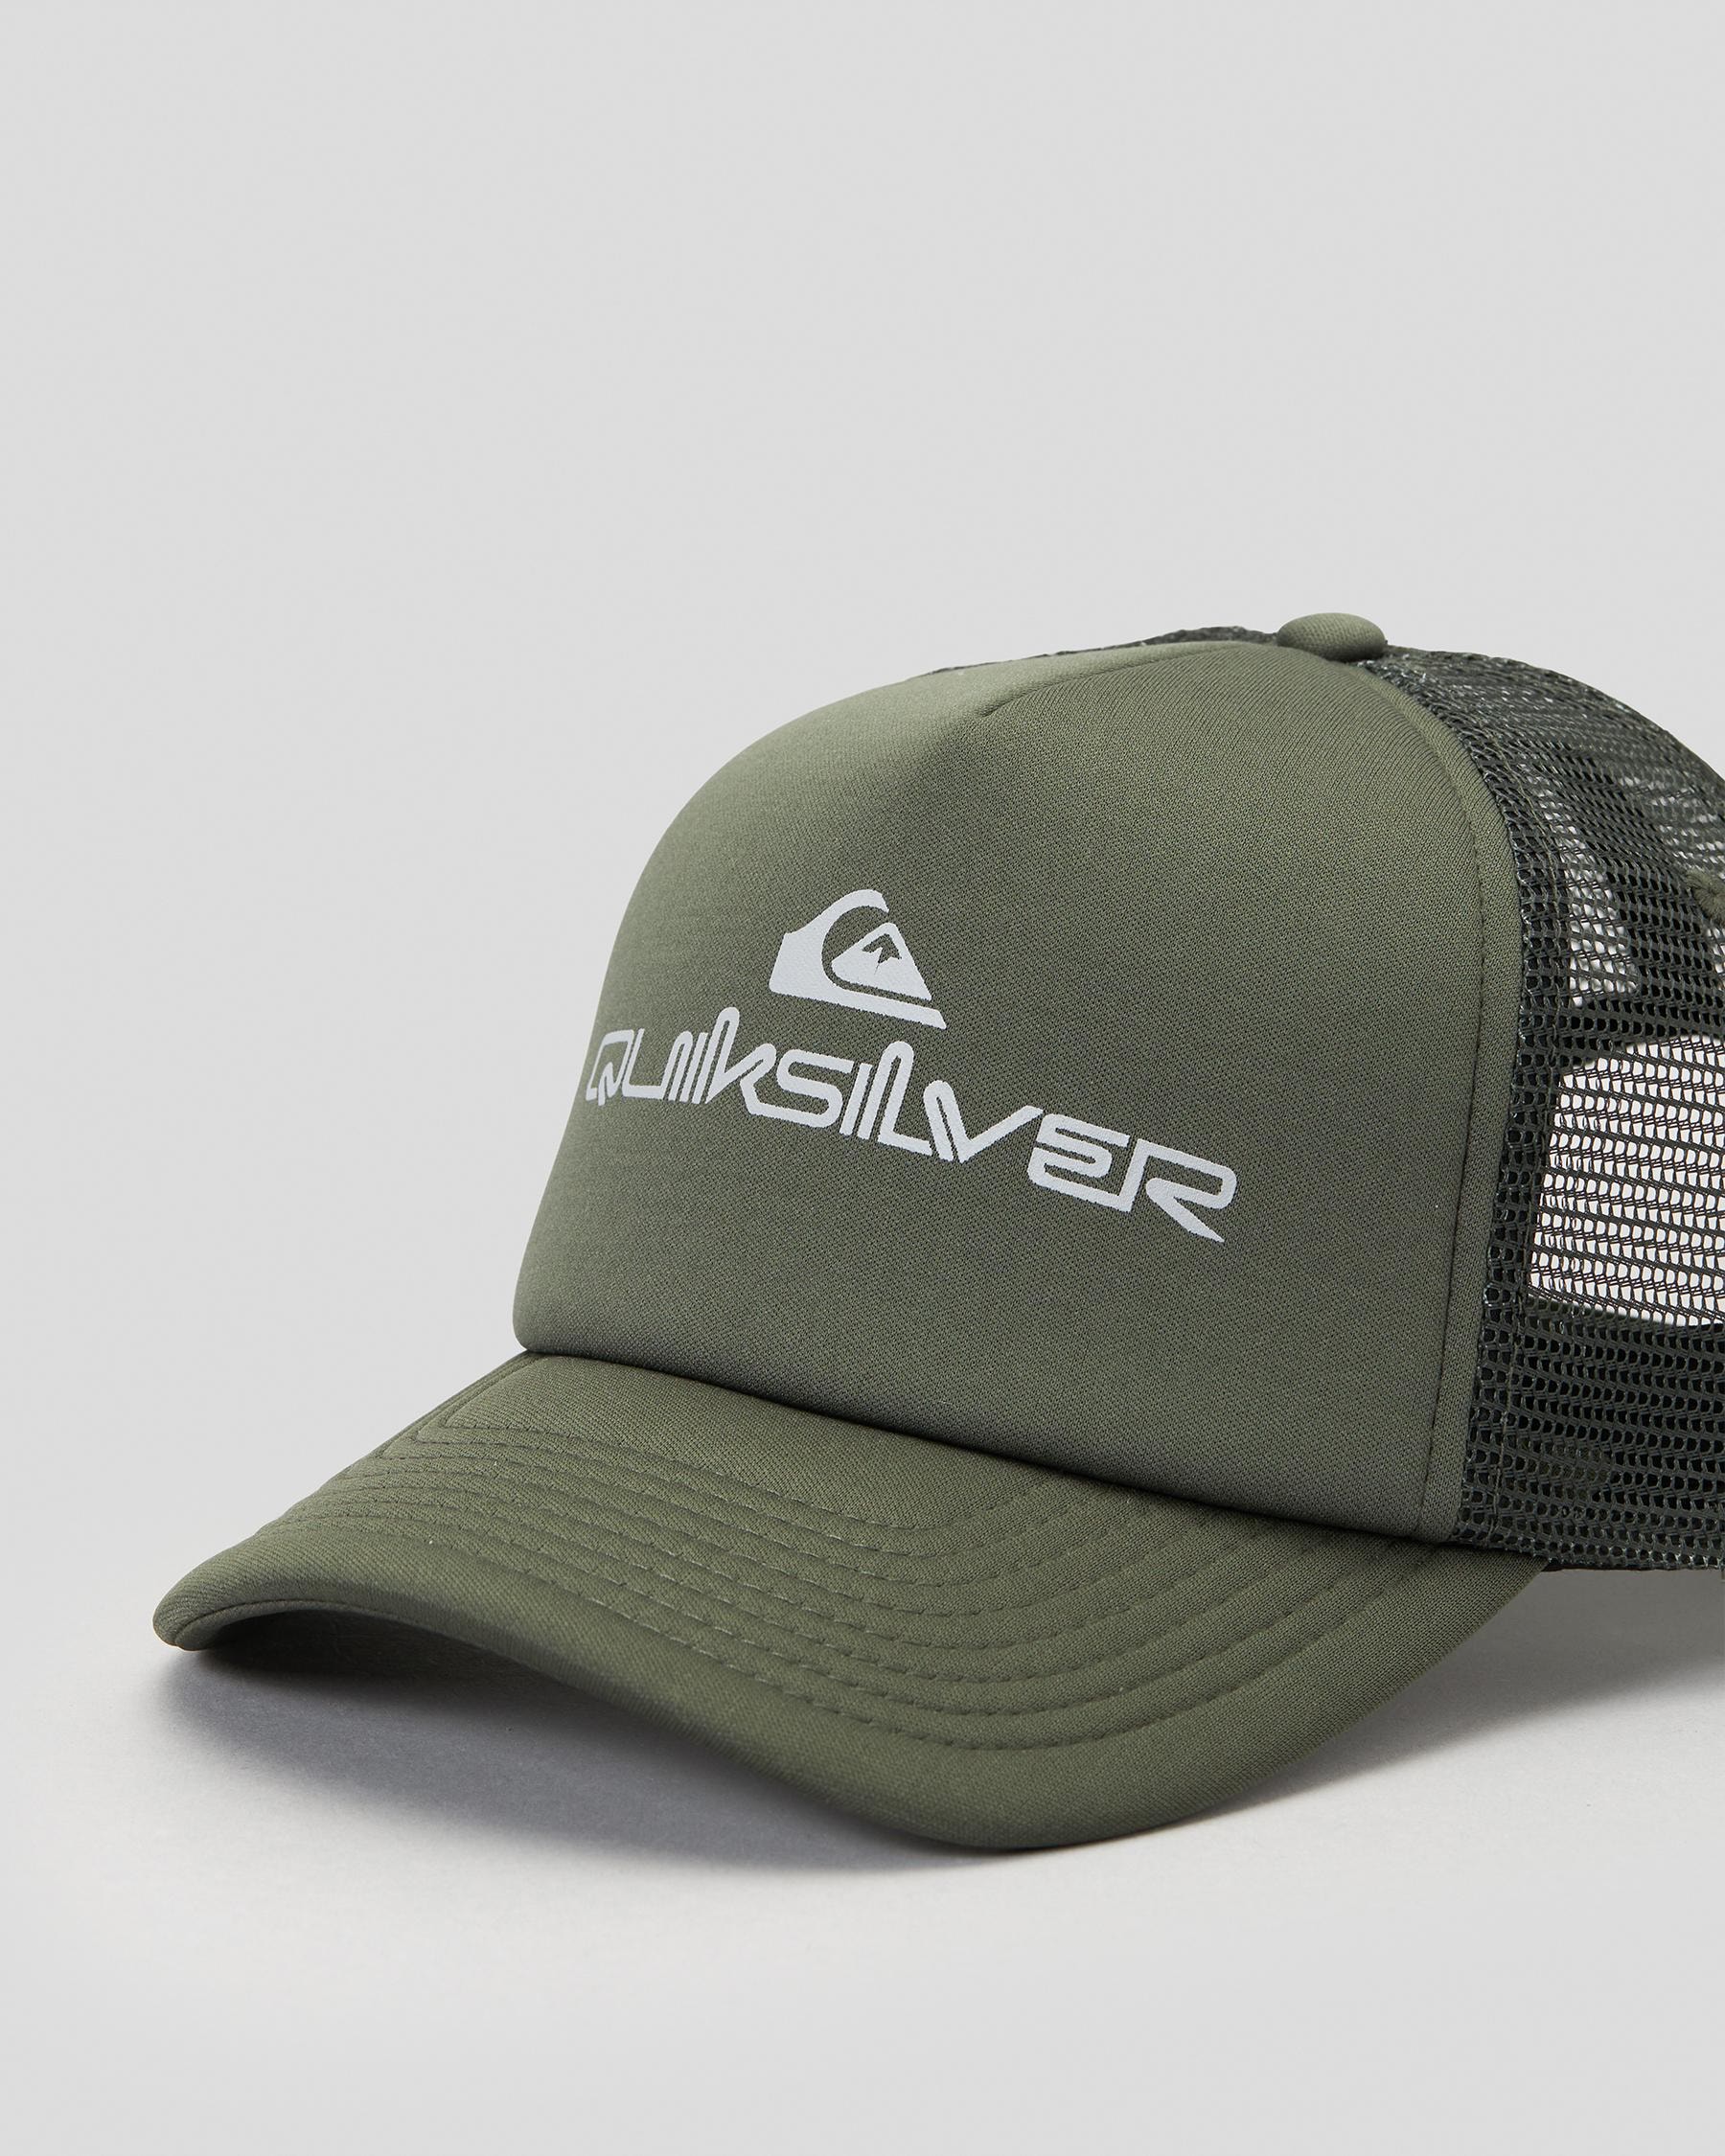 Quiksilver Omnistack Trucker Cap In Thyme Returns United FREE* - Easy & States - City Shipping Beach